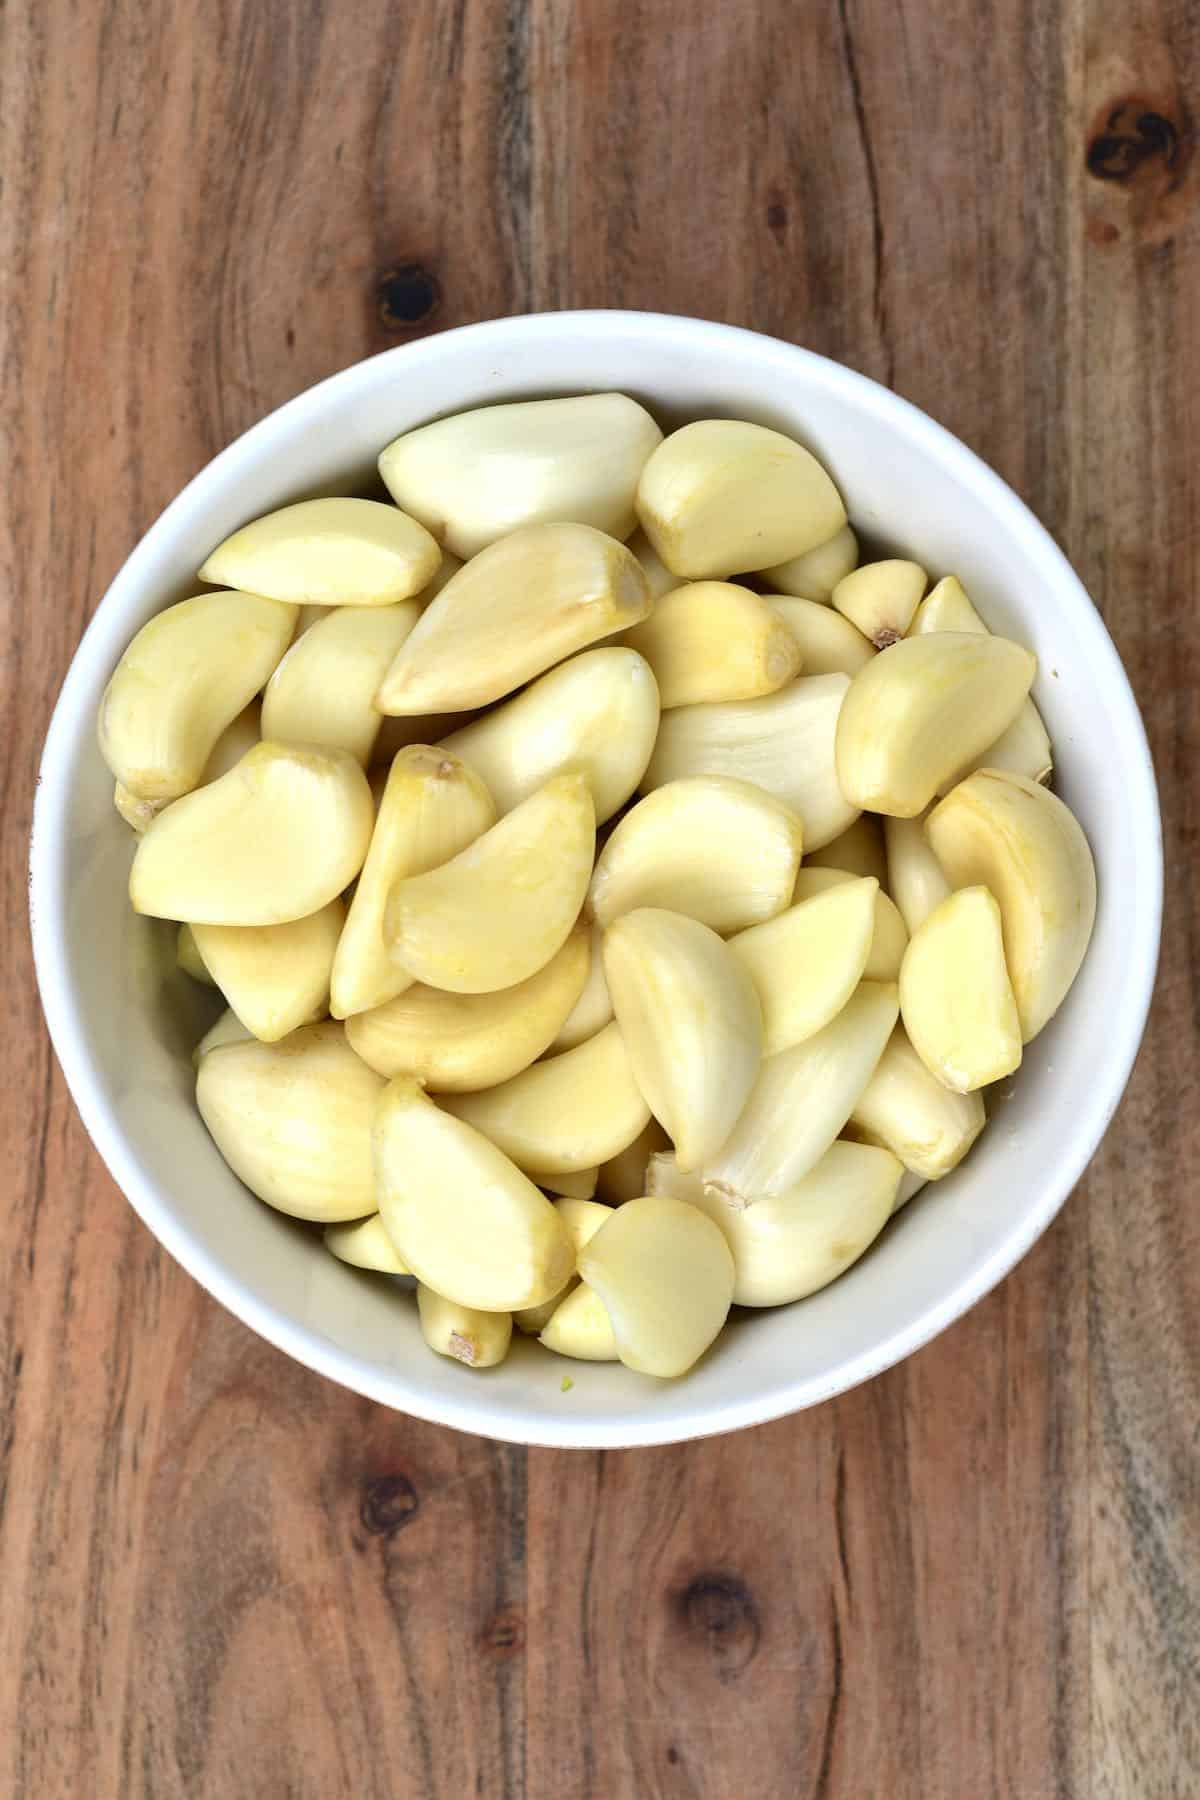 https://www.alphafoodie.com/wp-content/uploads/2021/02/How-to-preserve-and-store-garlic-garlic-cloves-in-a-bowl.jpeg